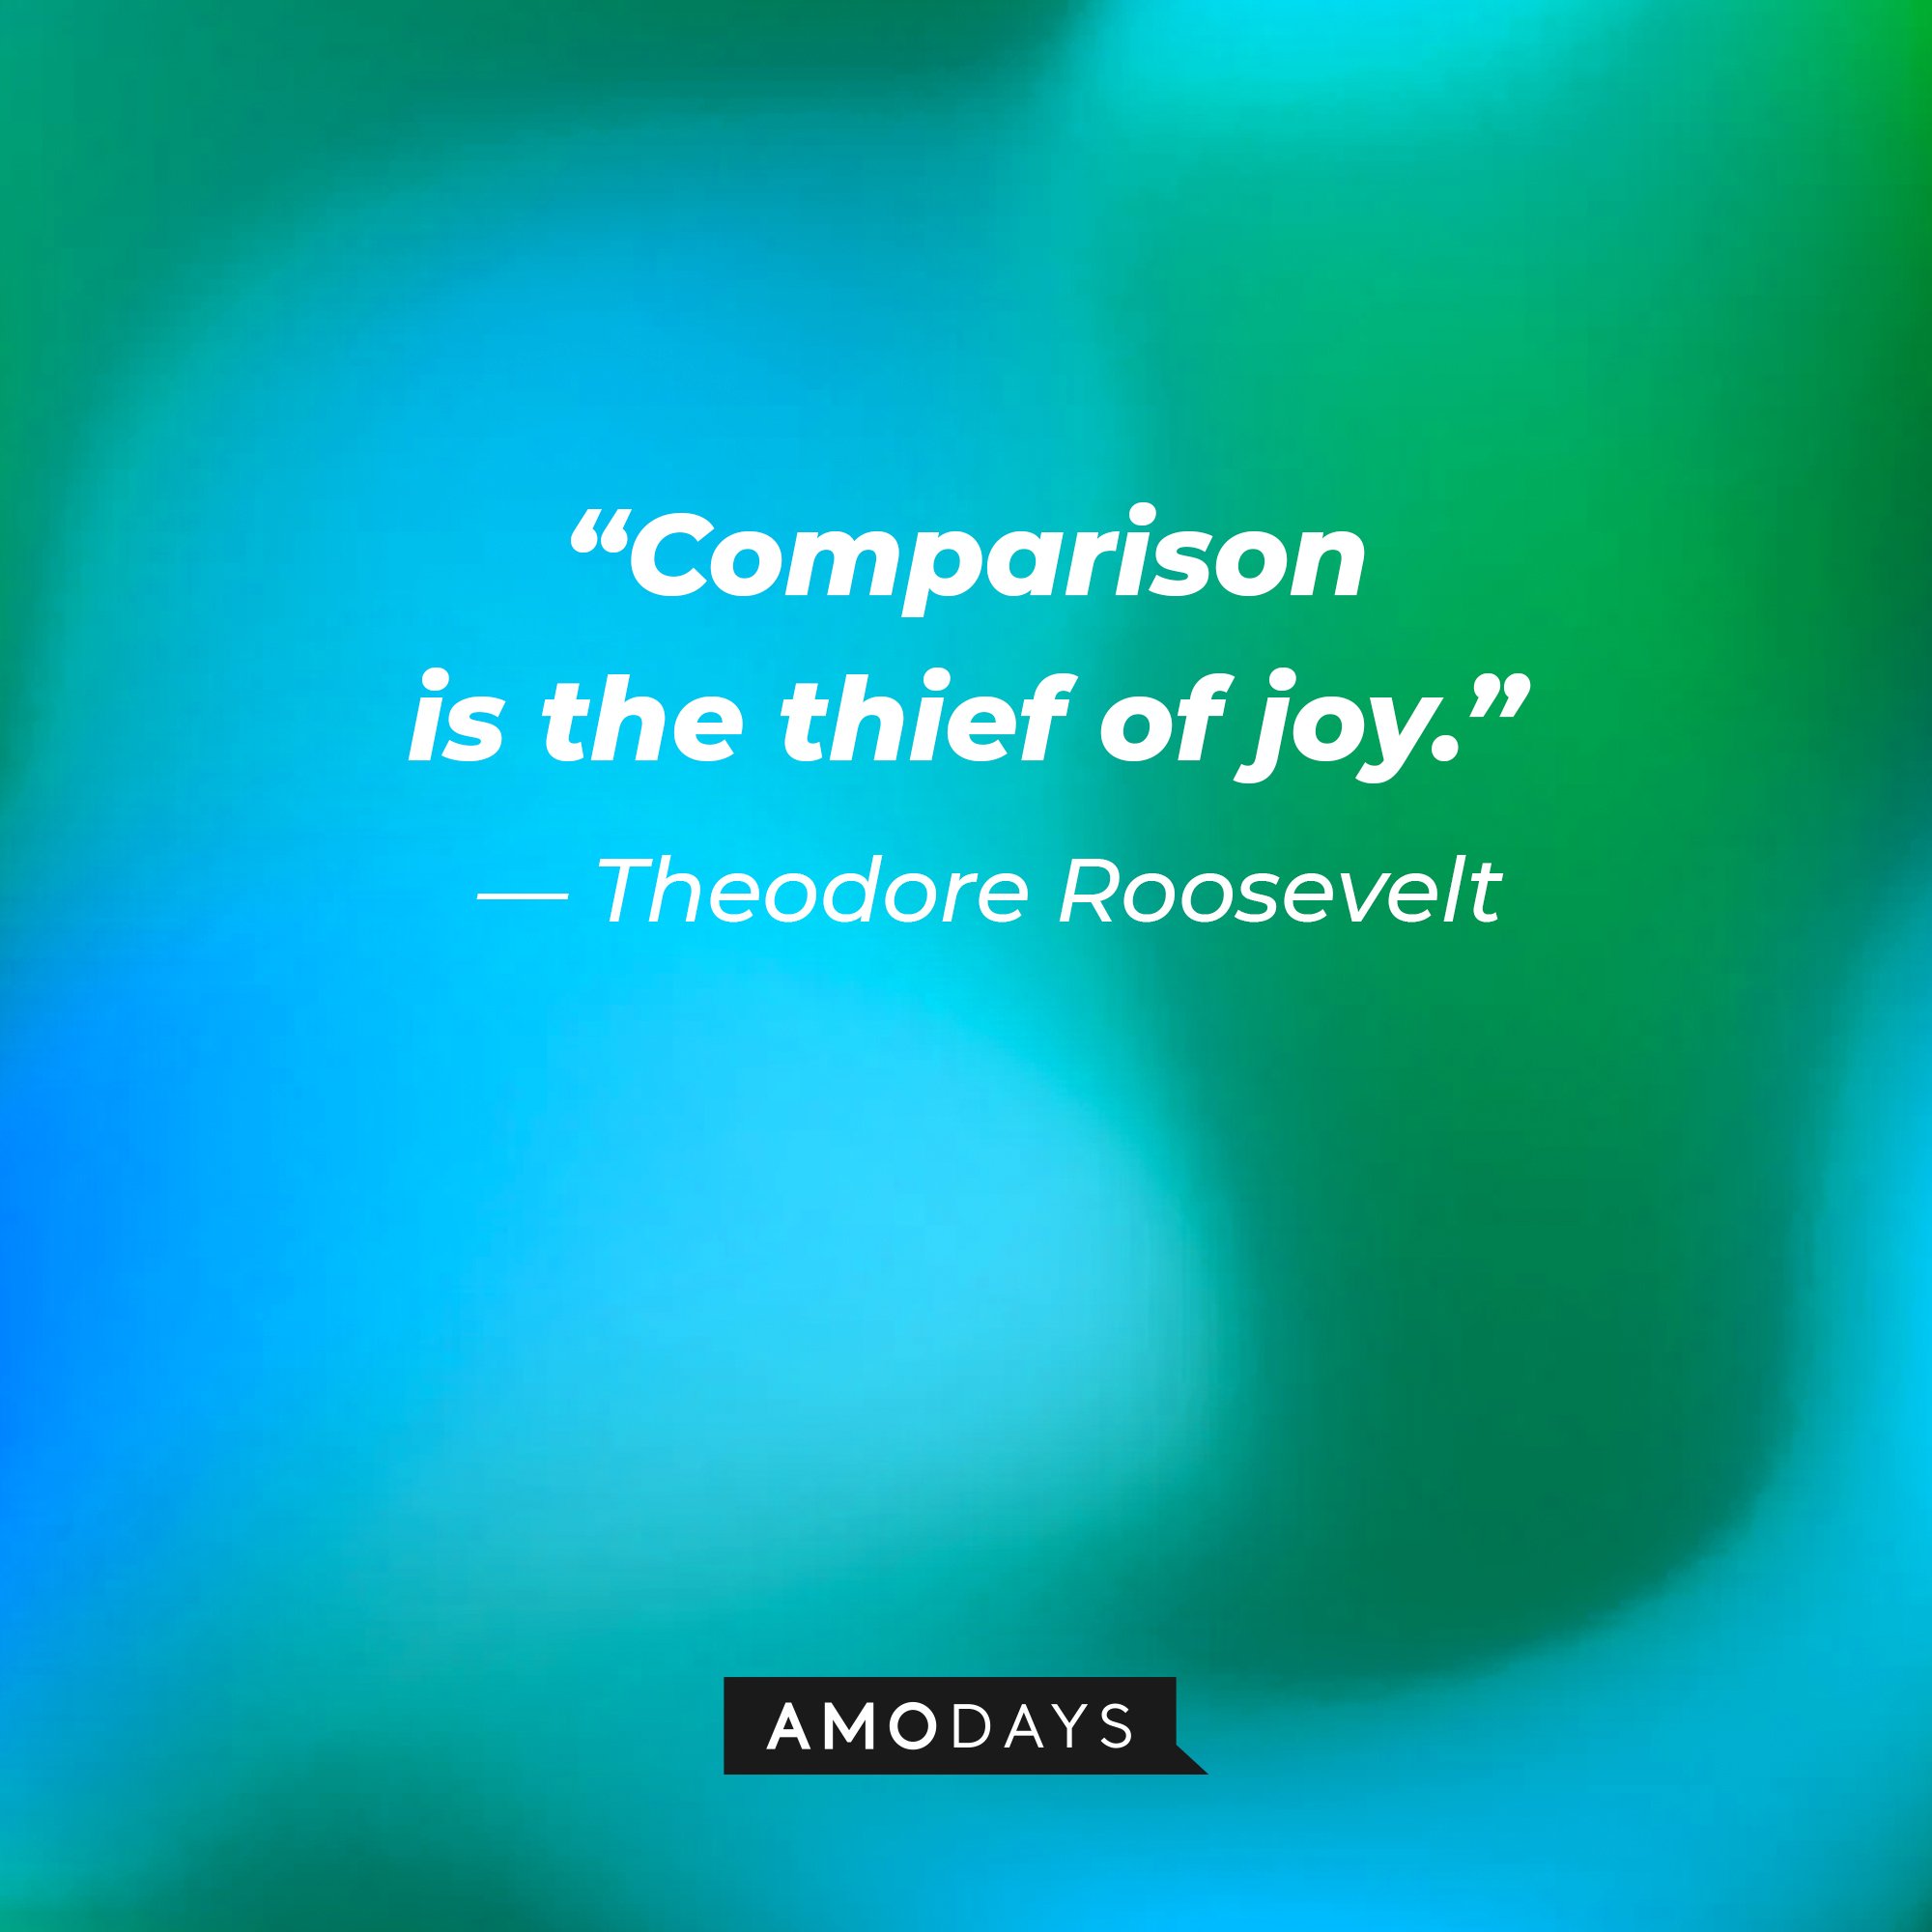  Theodore Roosevelt's quote: “Comparison is the thief of joy.” | Image: AmoDays